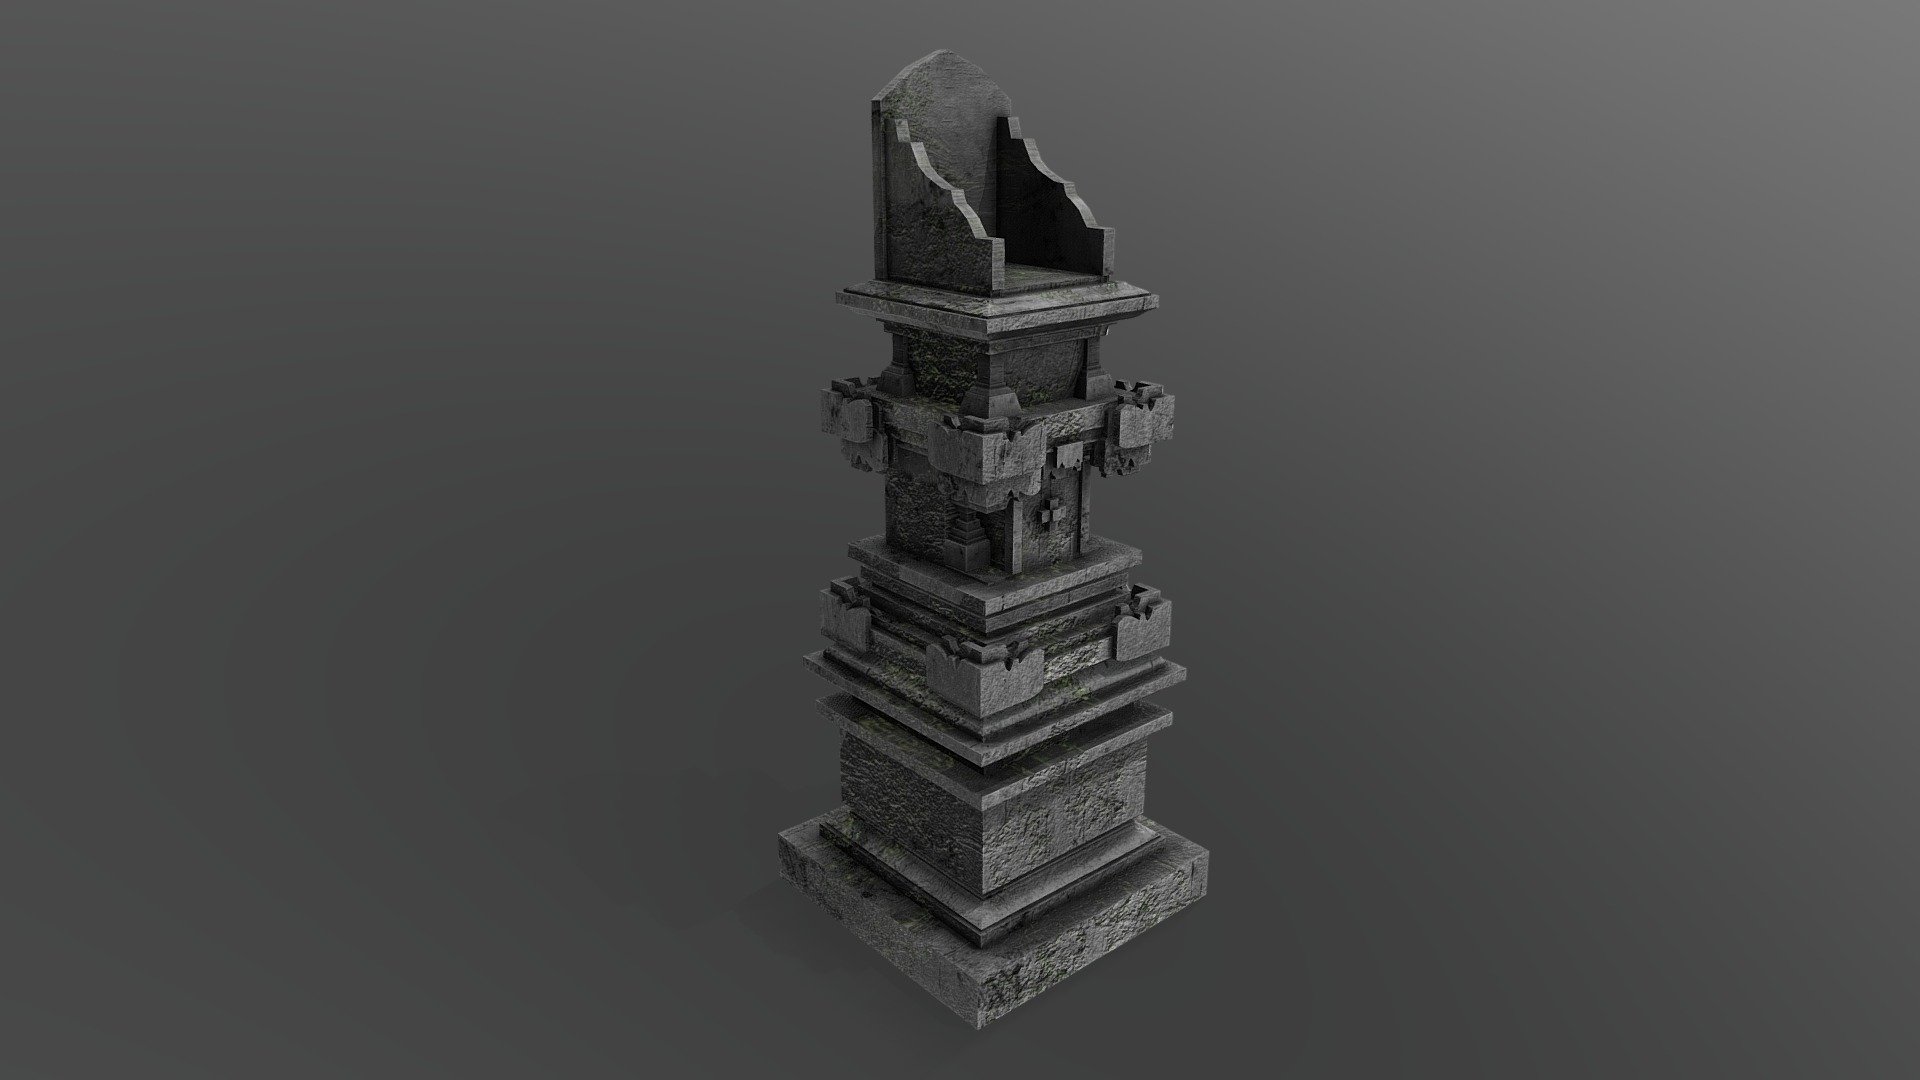 Game Asset Object Merajan / Sanggah From Bali Culture
Create = Blender
Texturing  = Substance Painter

About Merajan / Sanggah
Mrajan or Sanggah Pamerajan comes from the word: Sanggah, meaning Sanggar = holy place; Pamerajan comes from Praja = family. So Sanggah Pamerajan means = a sacred place for a certain family. For brevity, people call it in short: Sanggah, or Merajan - Merajan / Sanggah Bali Game Asset - 3D model by solodevelopment97 3d model